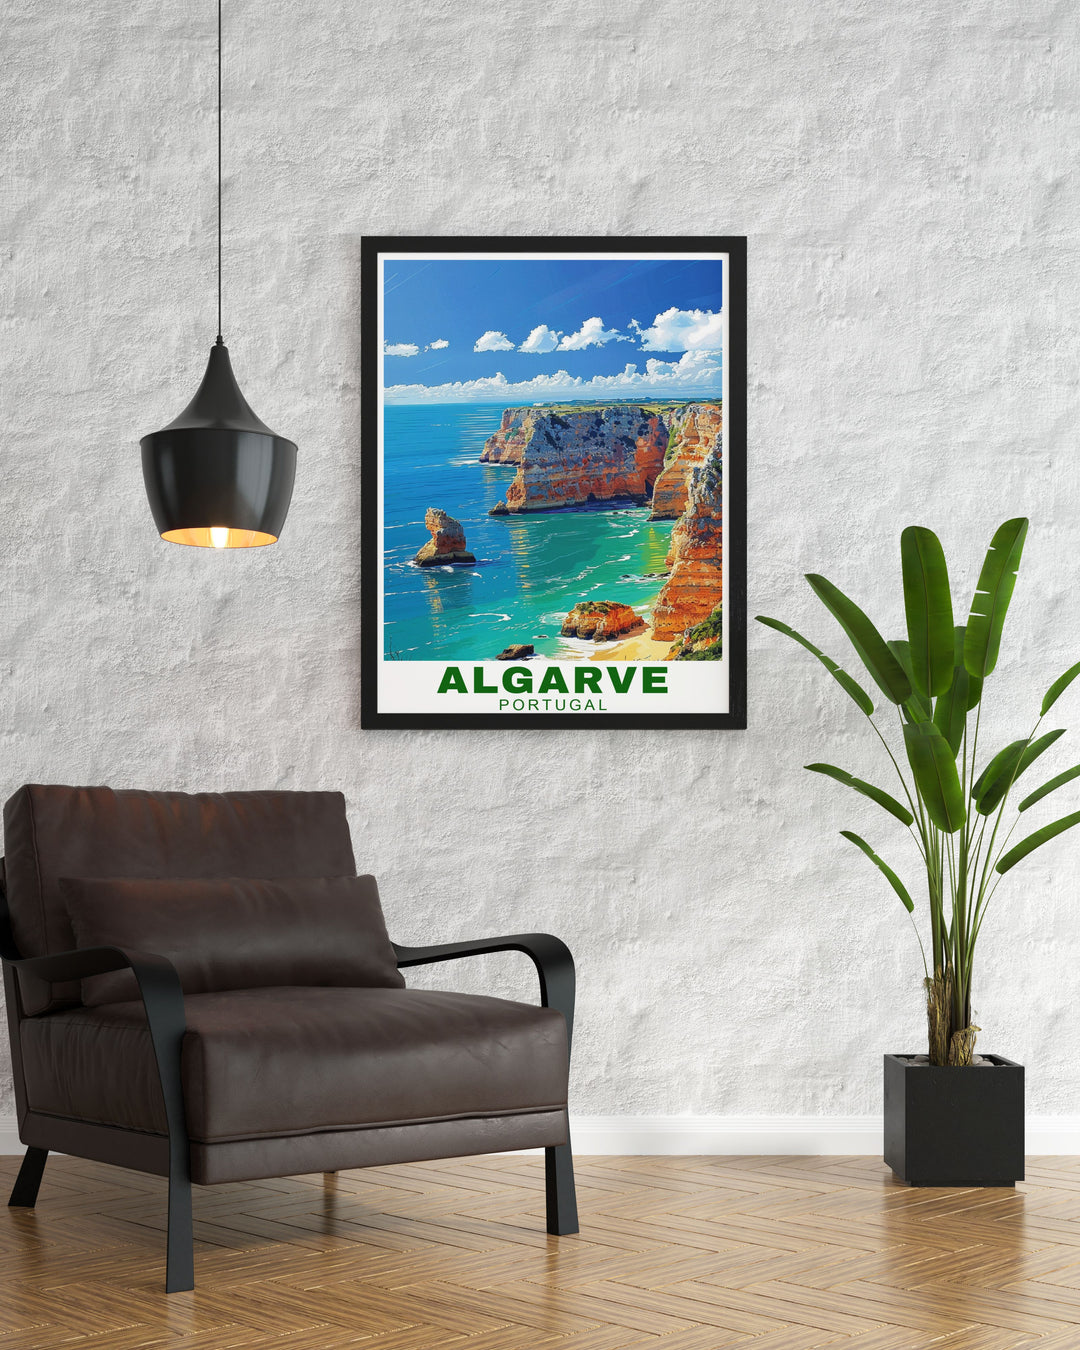 The natural beauty of Algarve cliffs is depicted in this travel poster, highlighting the towering formations and clear waters, perfect for enhancing your home with a piece of Portugals charm.